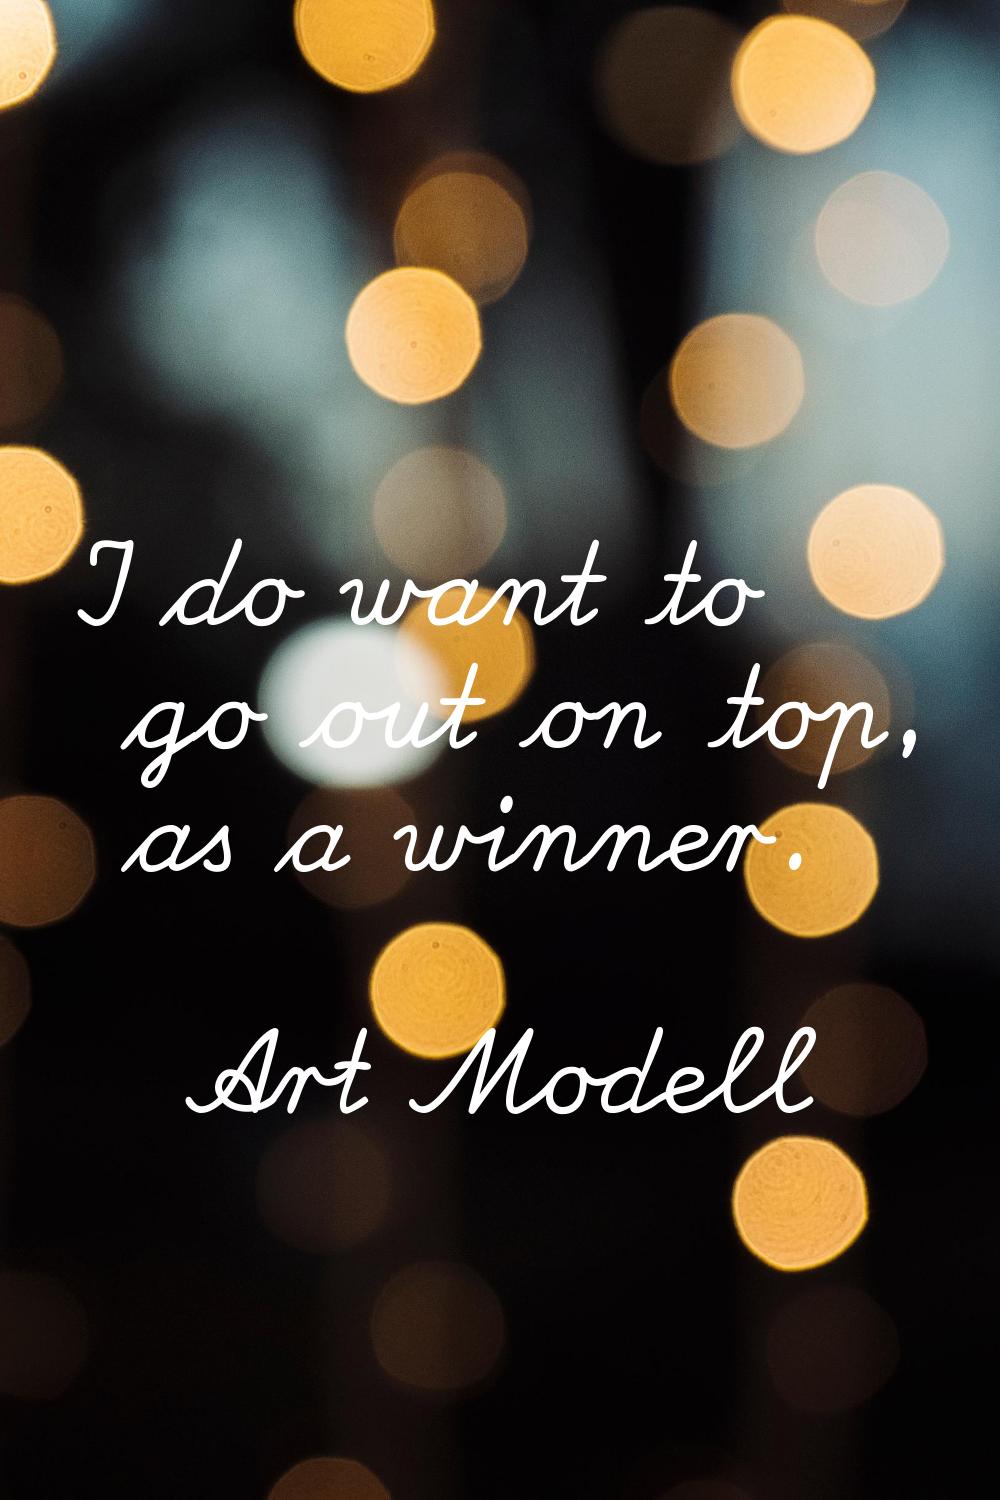 I do want to go out on top, as a winner.